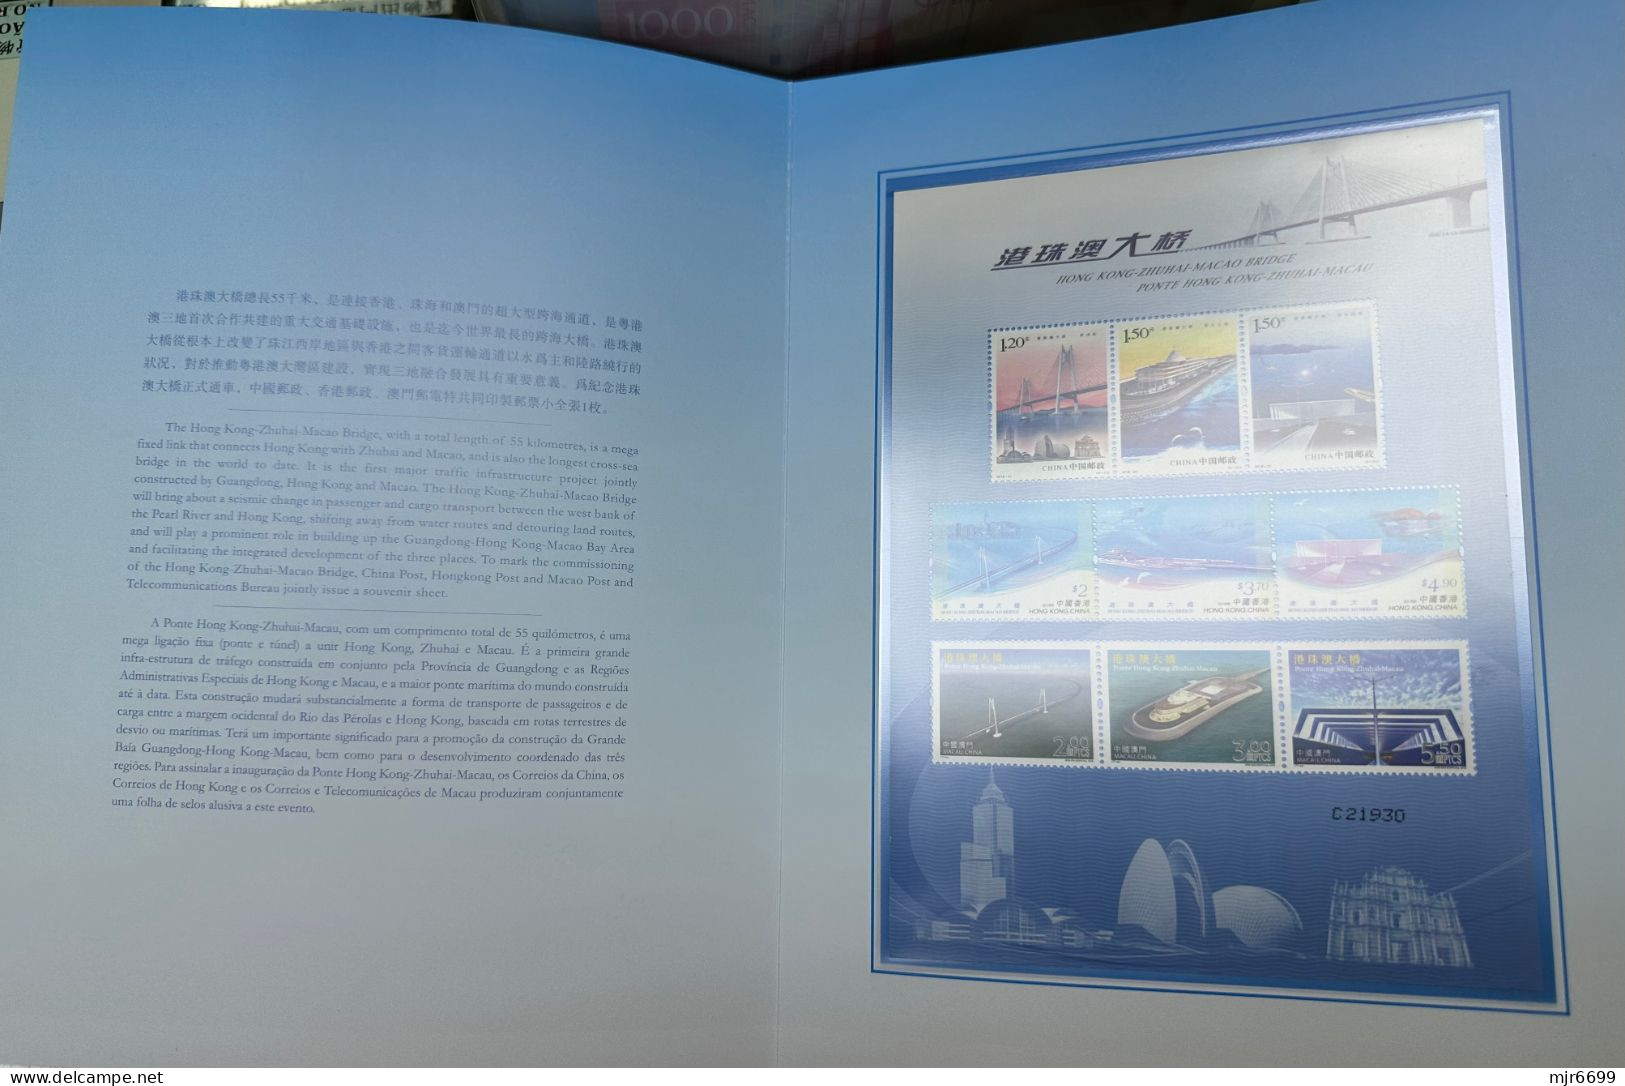 HONG KONG - ZHUHAI - MACAO BRIDGE, SPECIAL ISSUE OF A SHEETLET. SOLD OUT AT FIRST DAY. - Lots & Serien